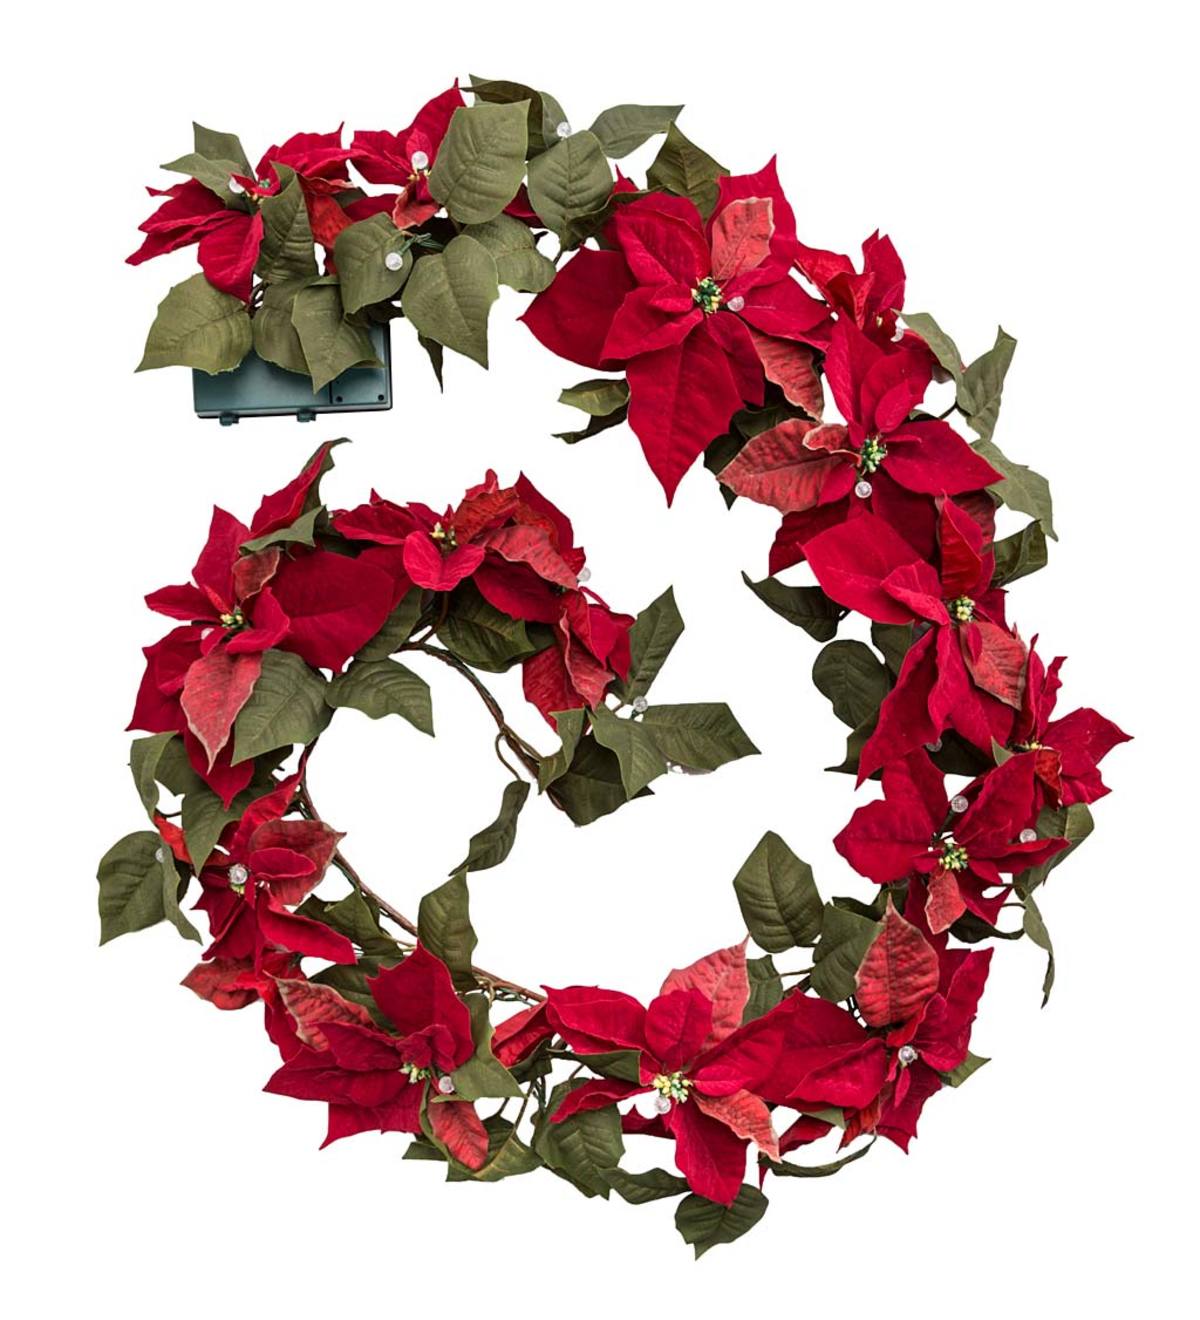 TURNMEON 6FT Christmas Poinsettia Garland with 20 Lights 10 Poinsettia 110 Glitter Golden Berry 5 Pinecones 60 Leaves Battery Operated Christmas Decor Indoor Outdoor Mantle Holiday Decor Warm White 